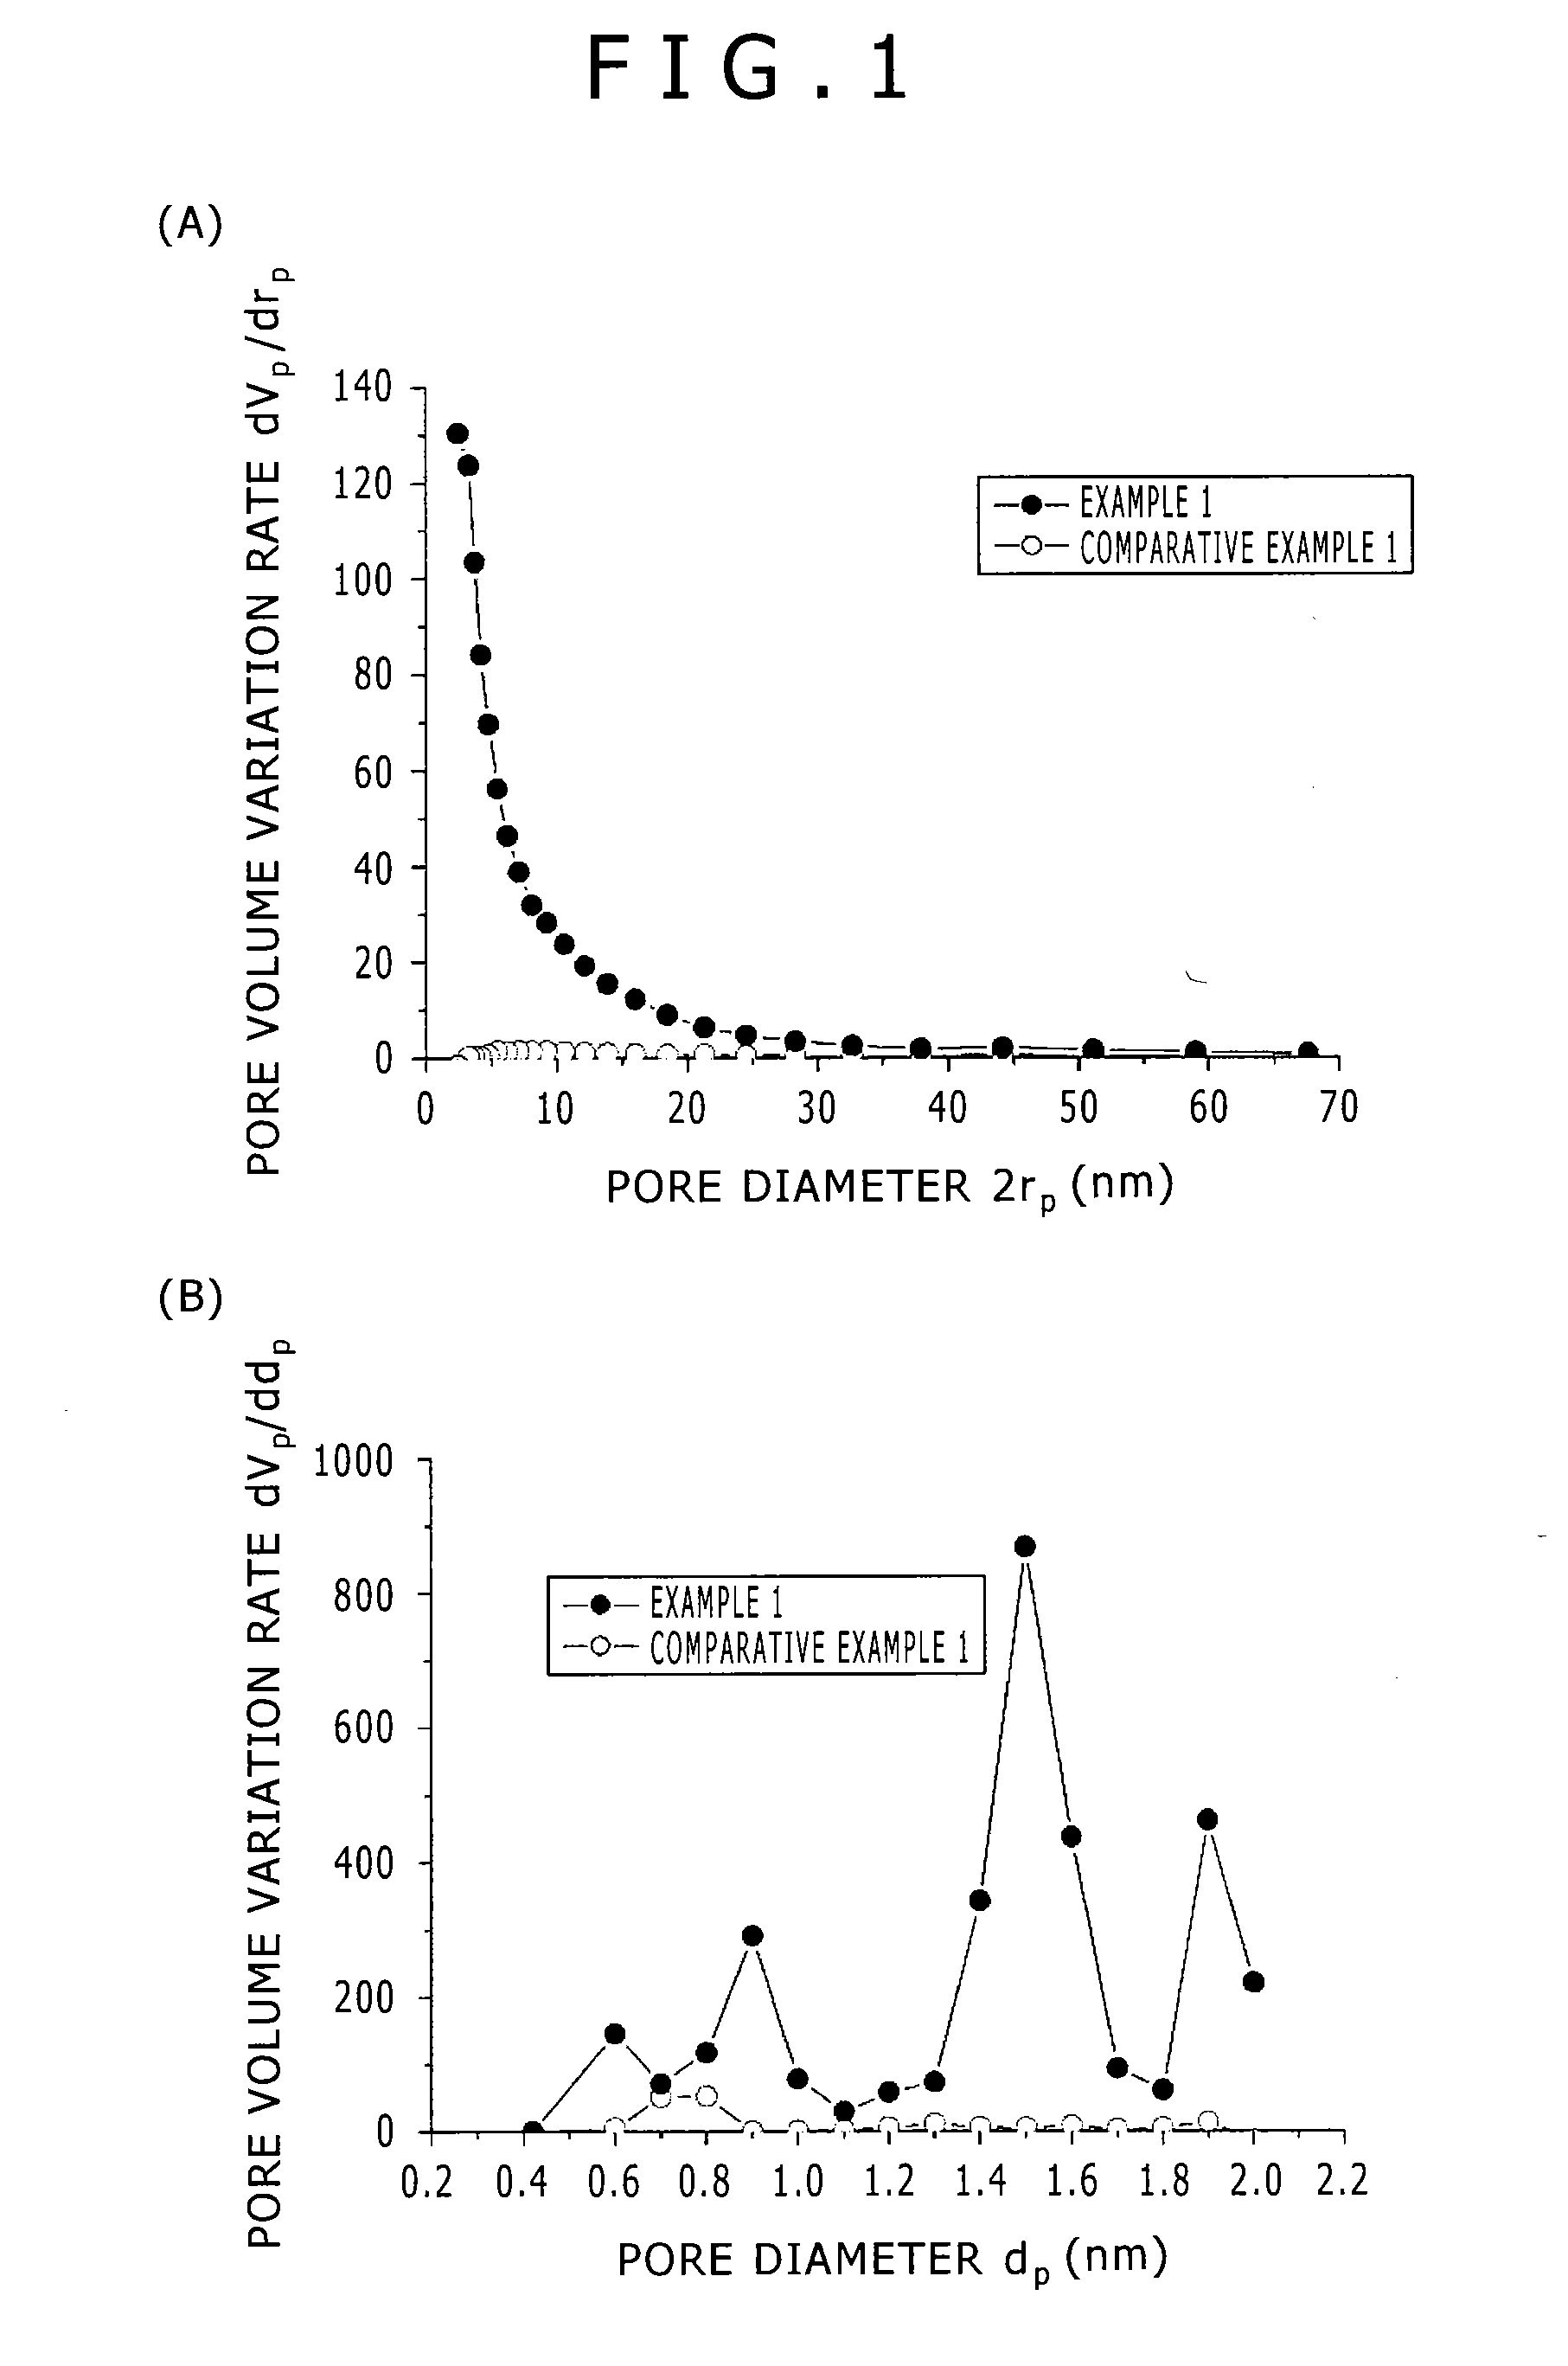 Adsorbent, cleansing agent, renal disease drug, and functional food